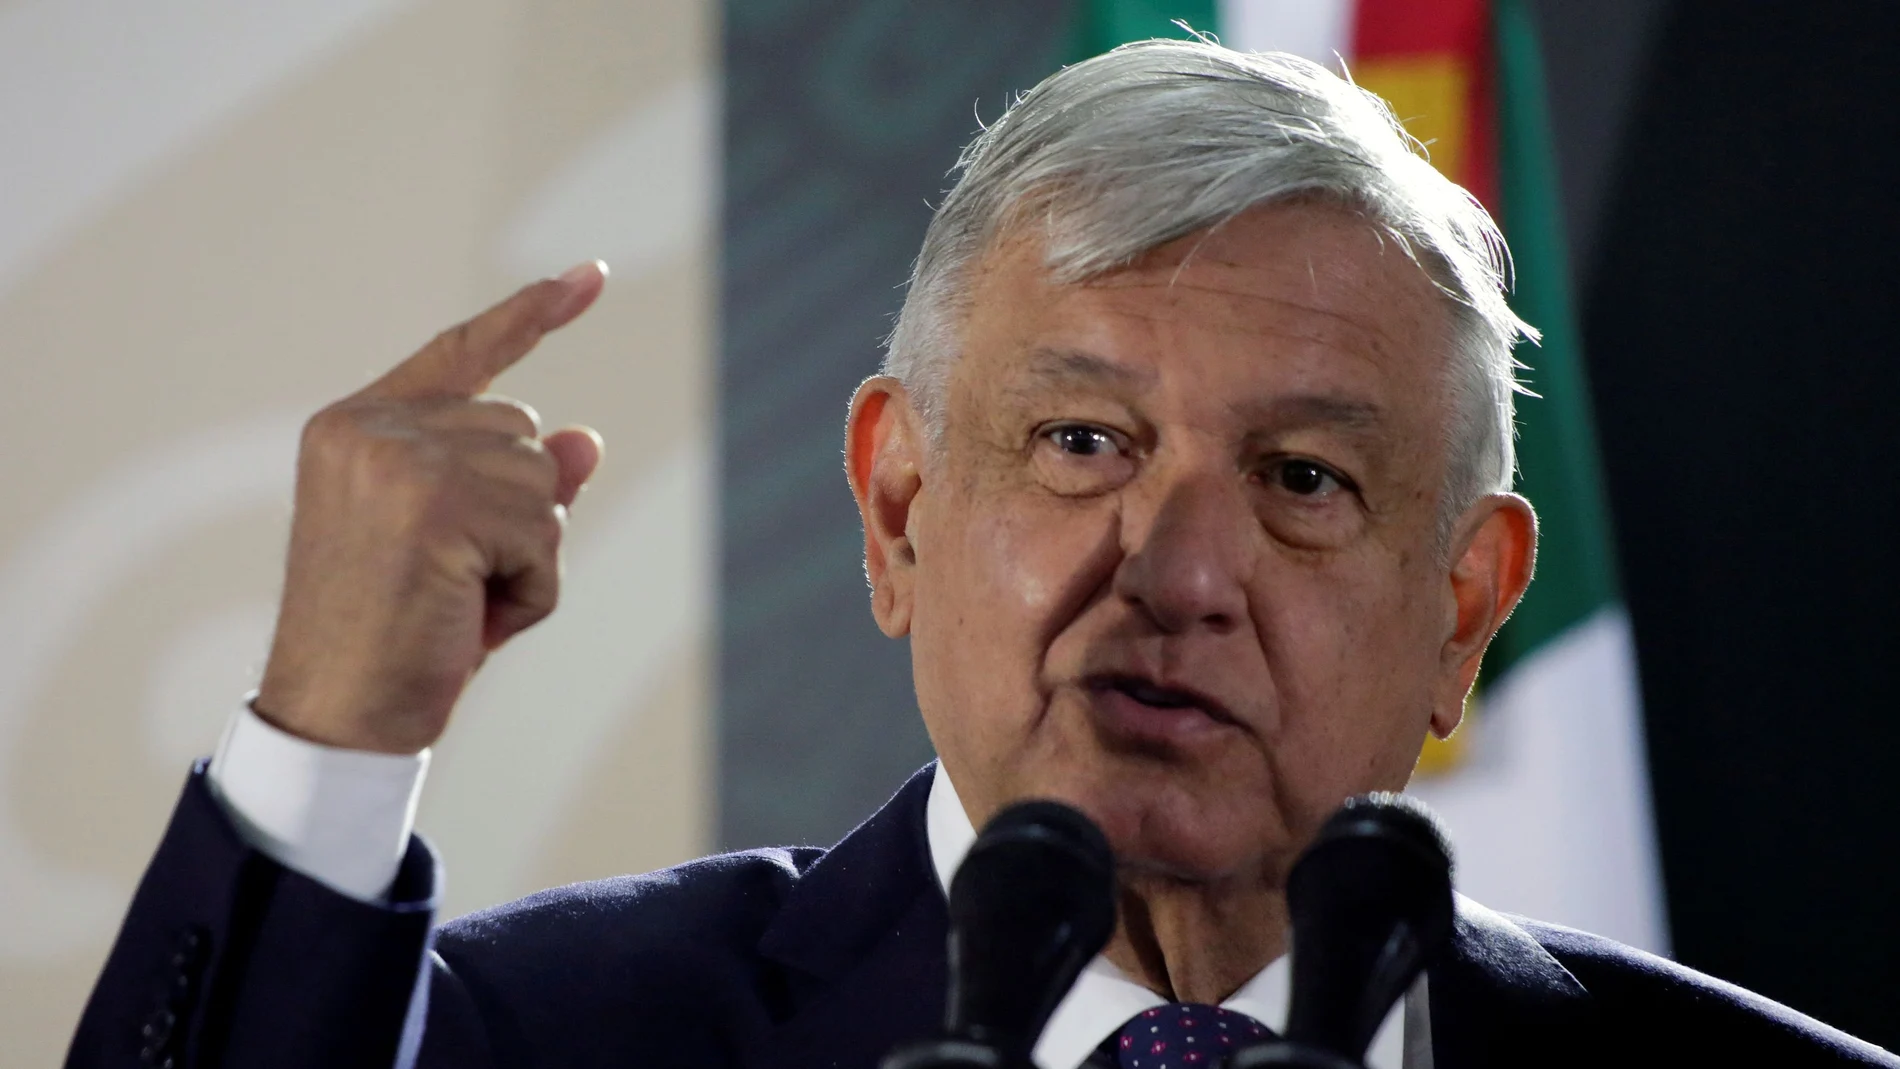 FILE PHOTO: Mexico's President Andres Manuel Lopez Obrador speaks during a news conference in Ciudad Juarez